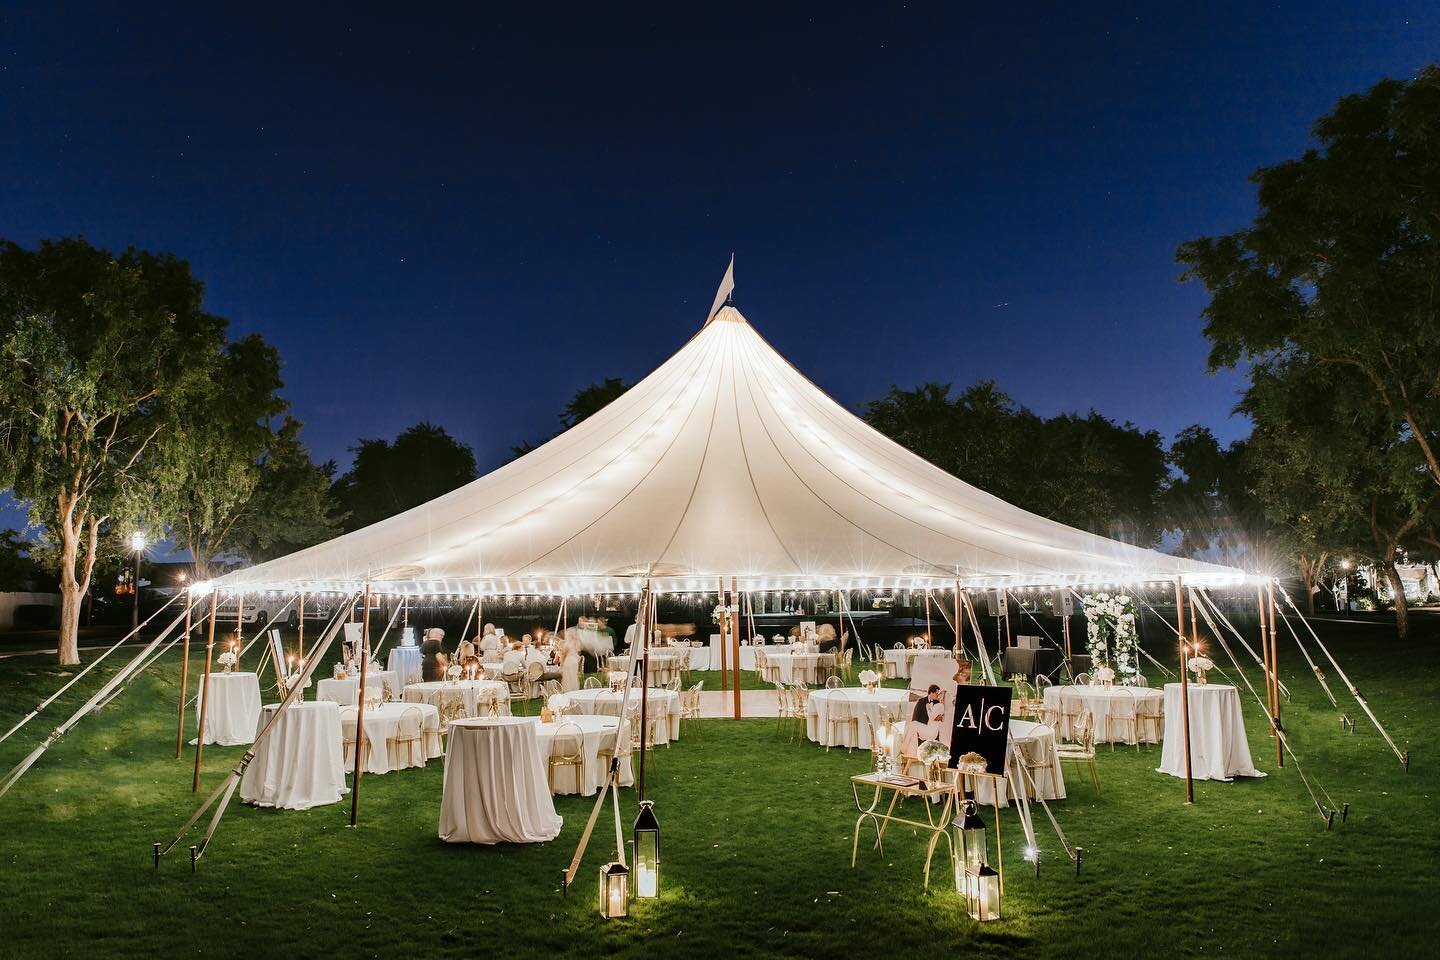 Love seeing our tents transform a common area (retention basin here) into a beautiful event venue 🤍

Queen Tent + Lighting
Amber Ghost Chairs
Maple Dance Floor
6&rsquo; Banquet Round Tables
Banquet Cocktail Tables